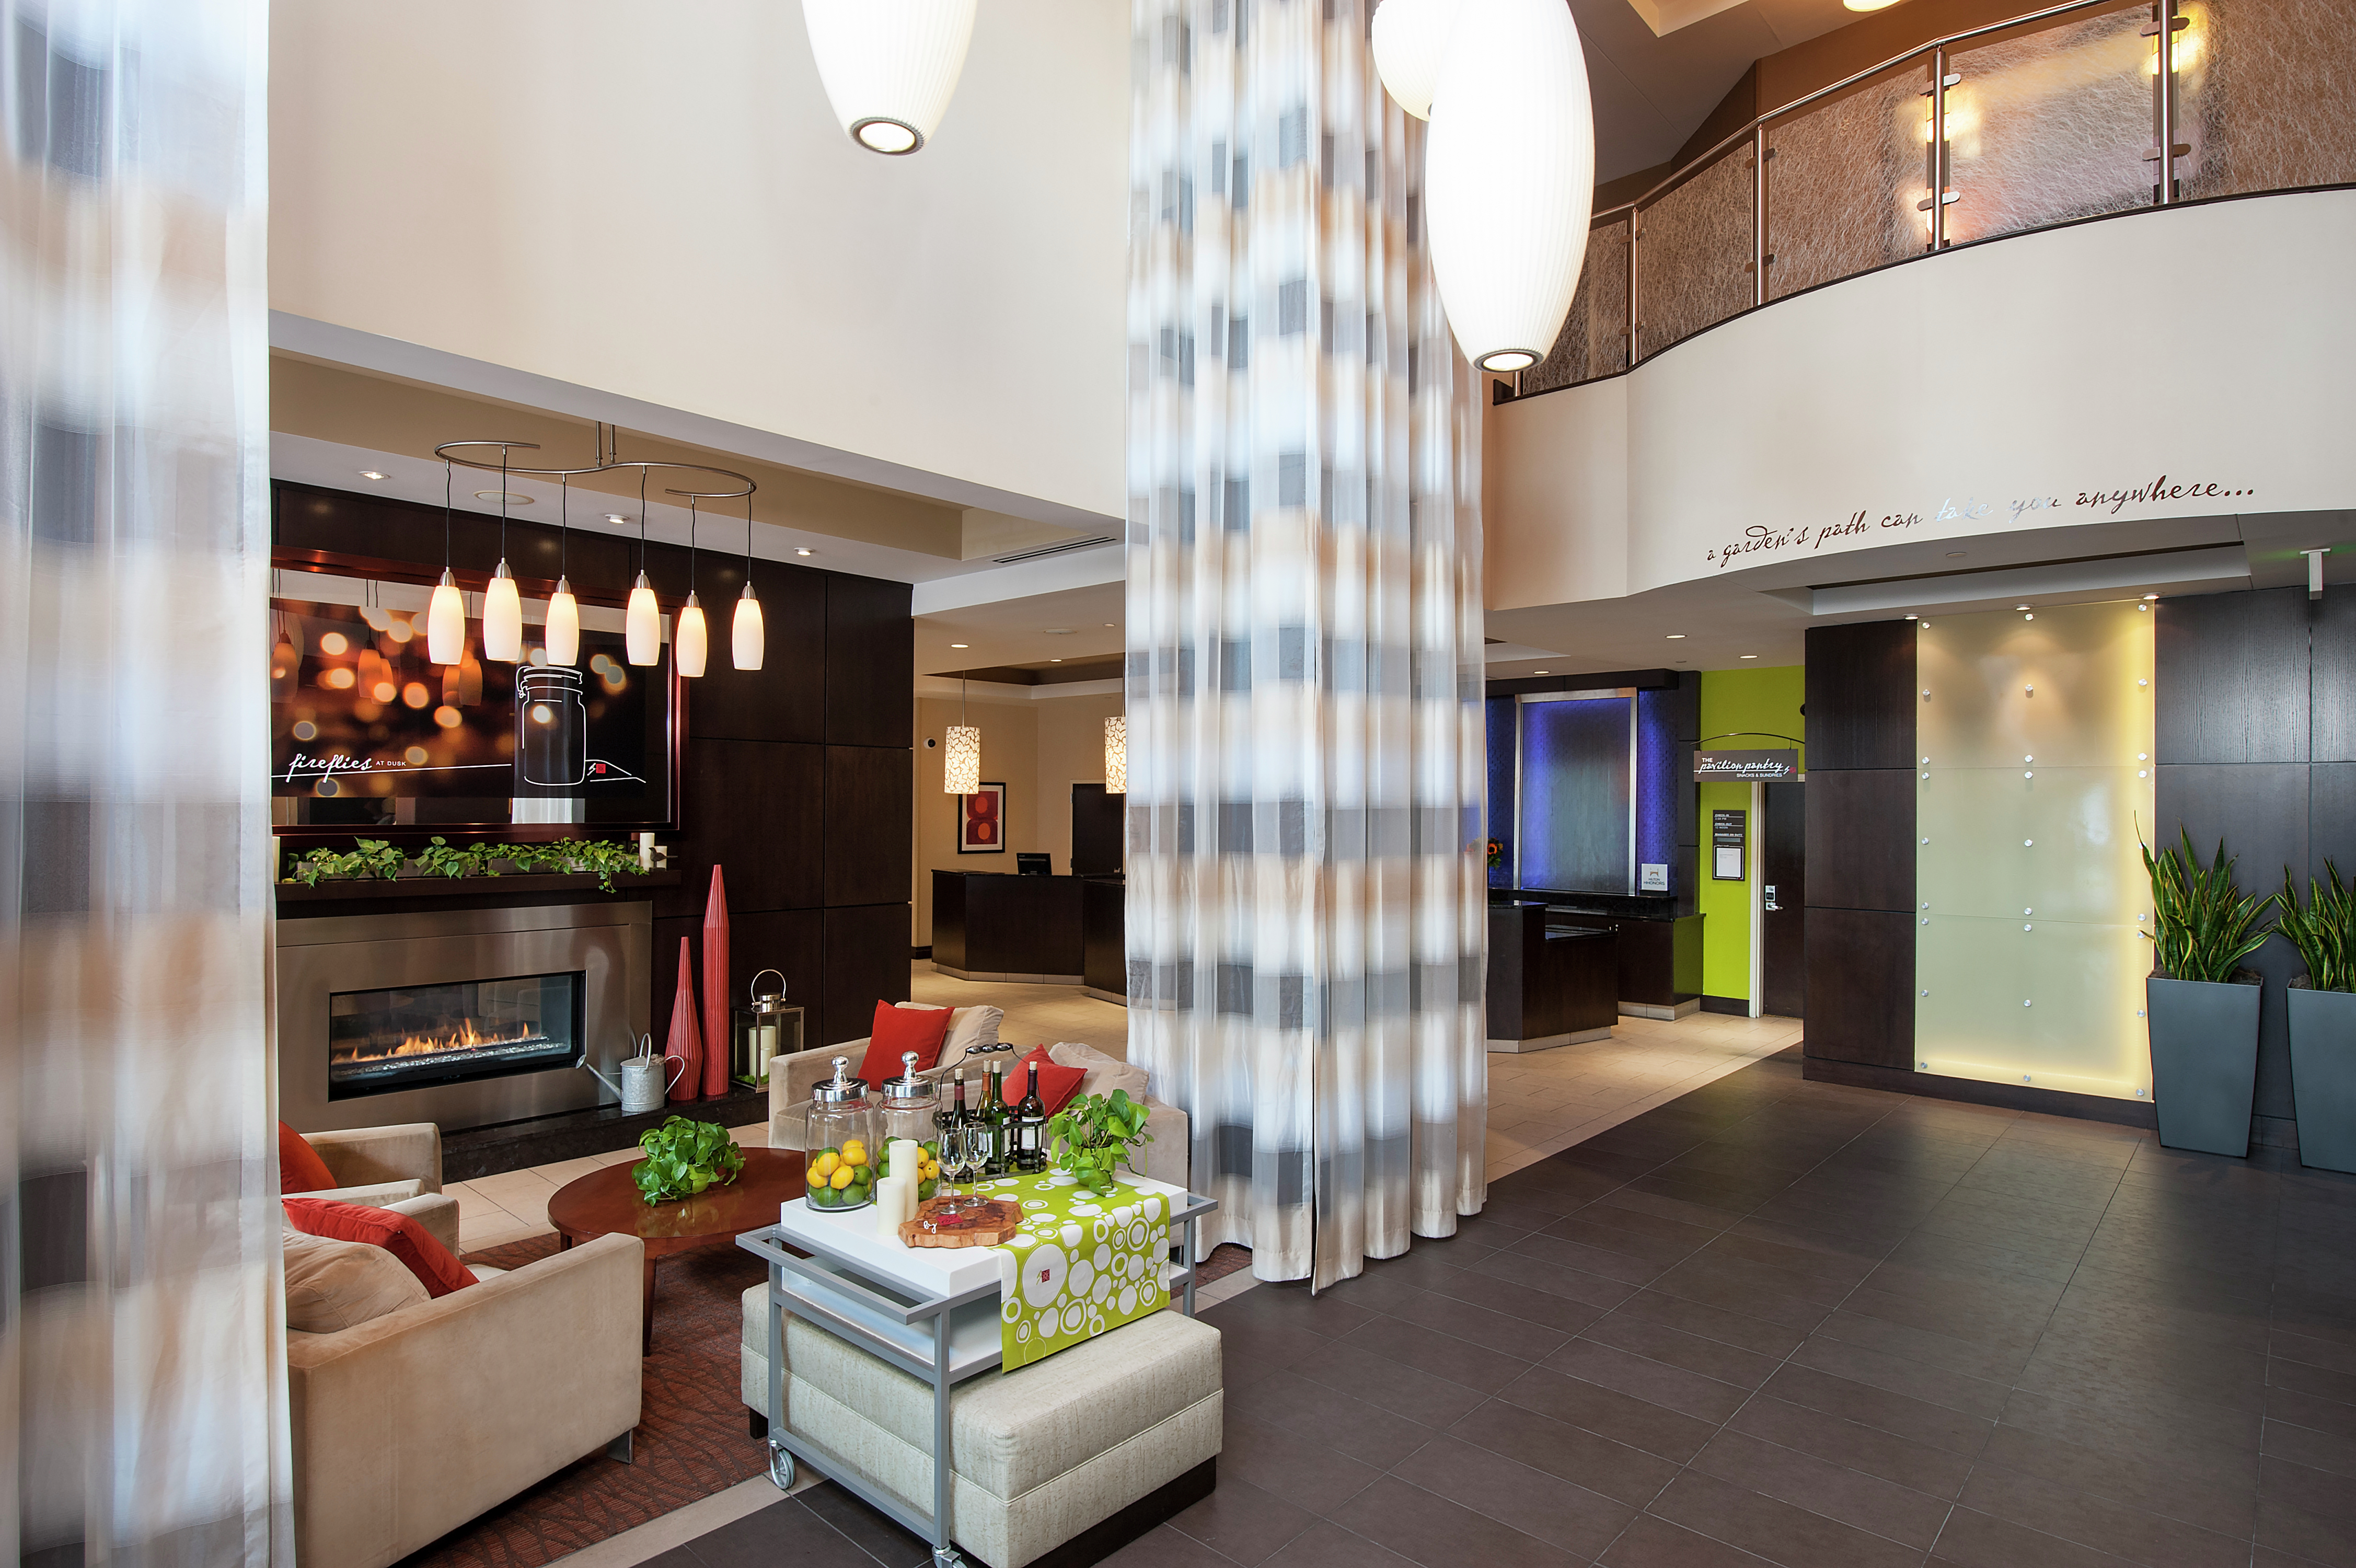 Soft Seating Around Fireplace and Beverage Center in Hotel Lobby 